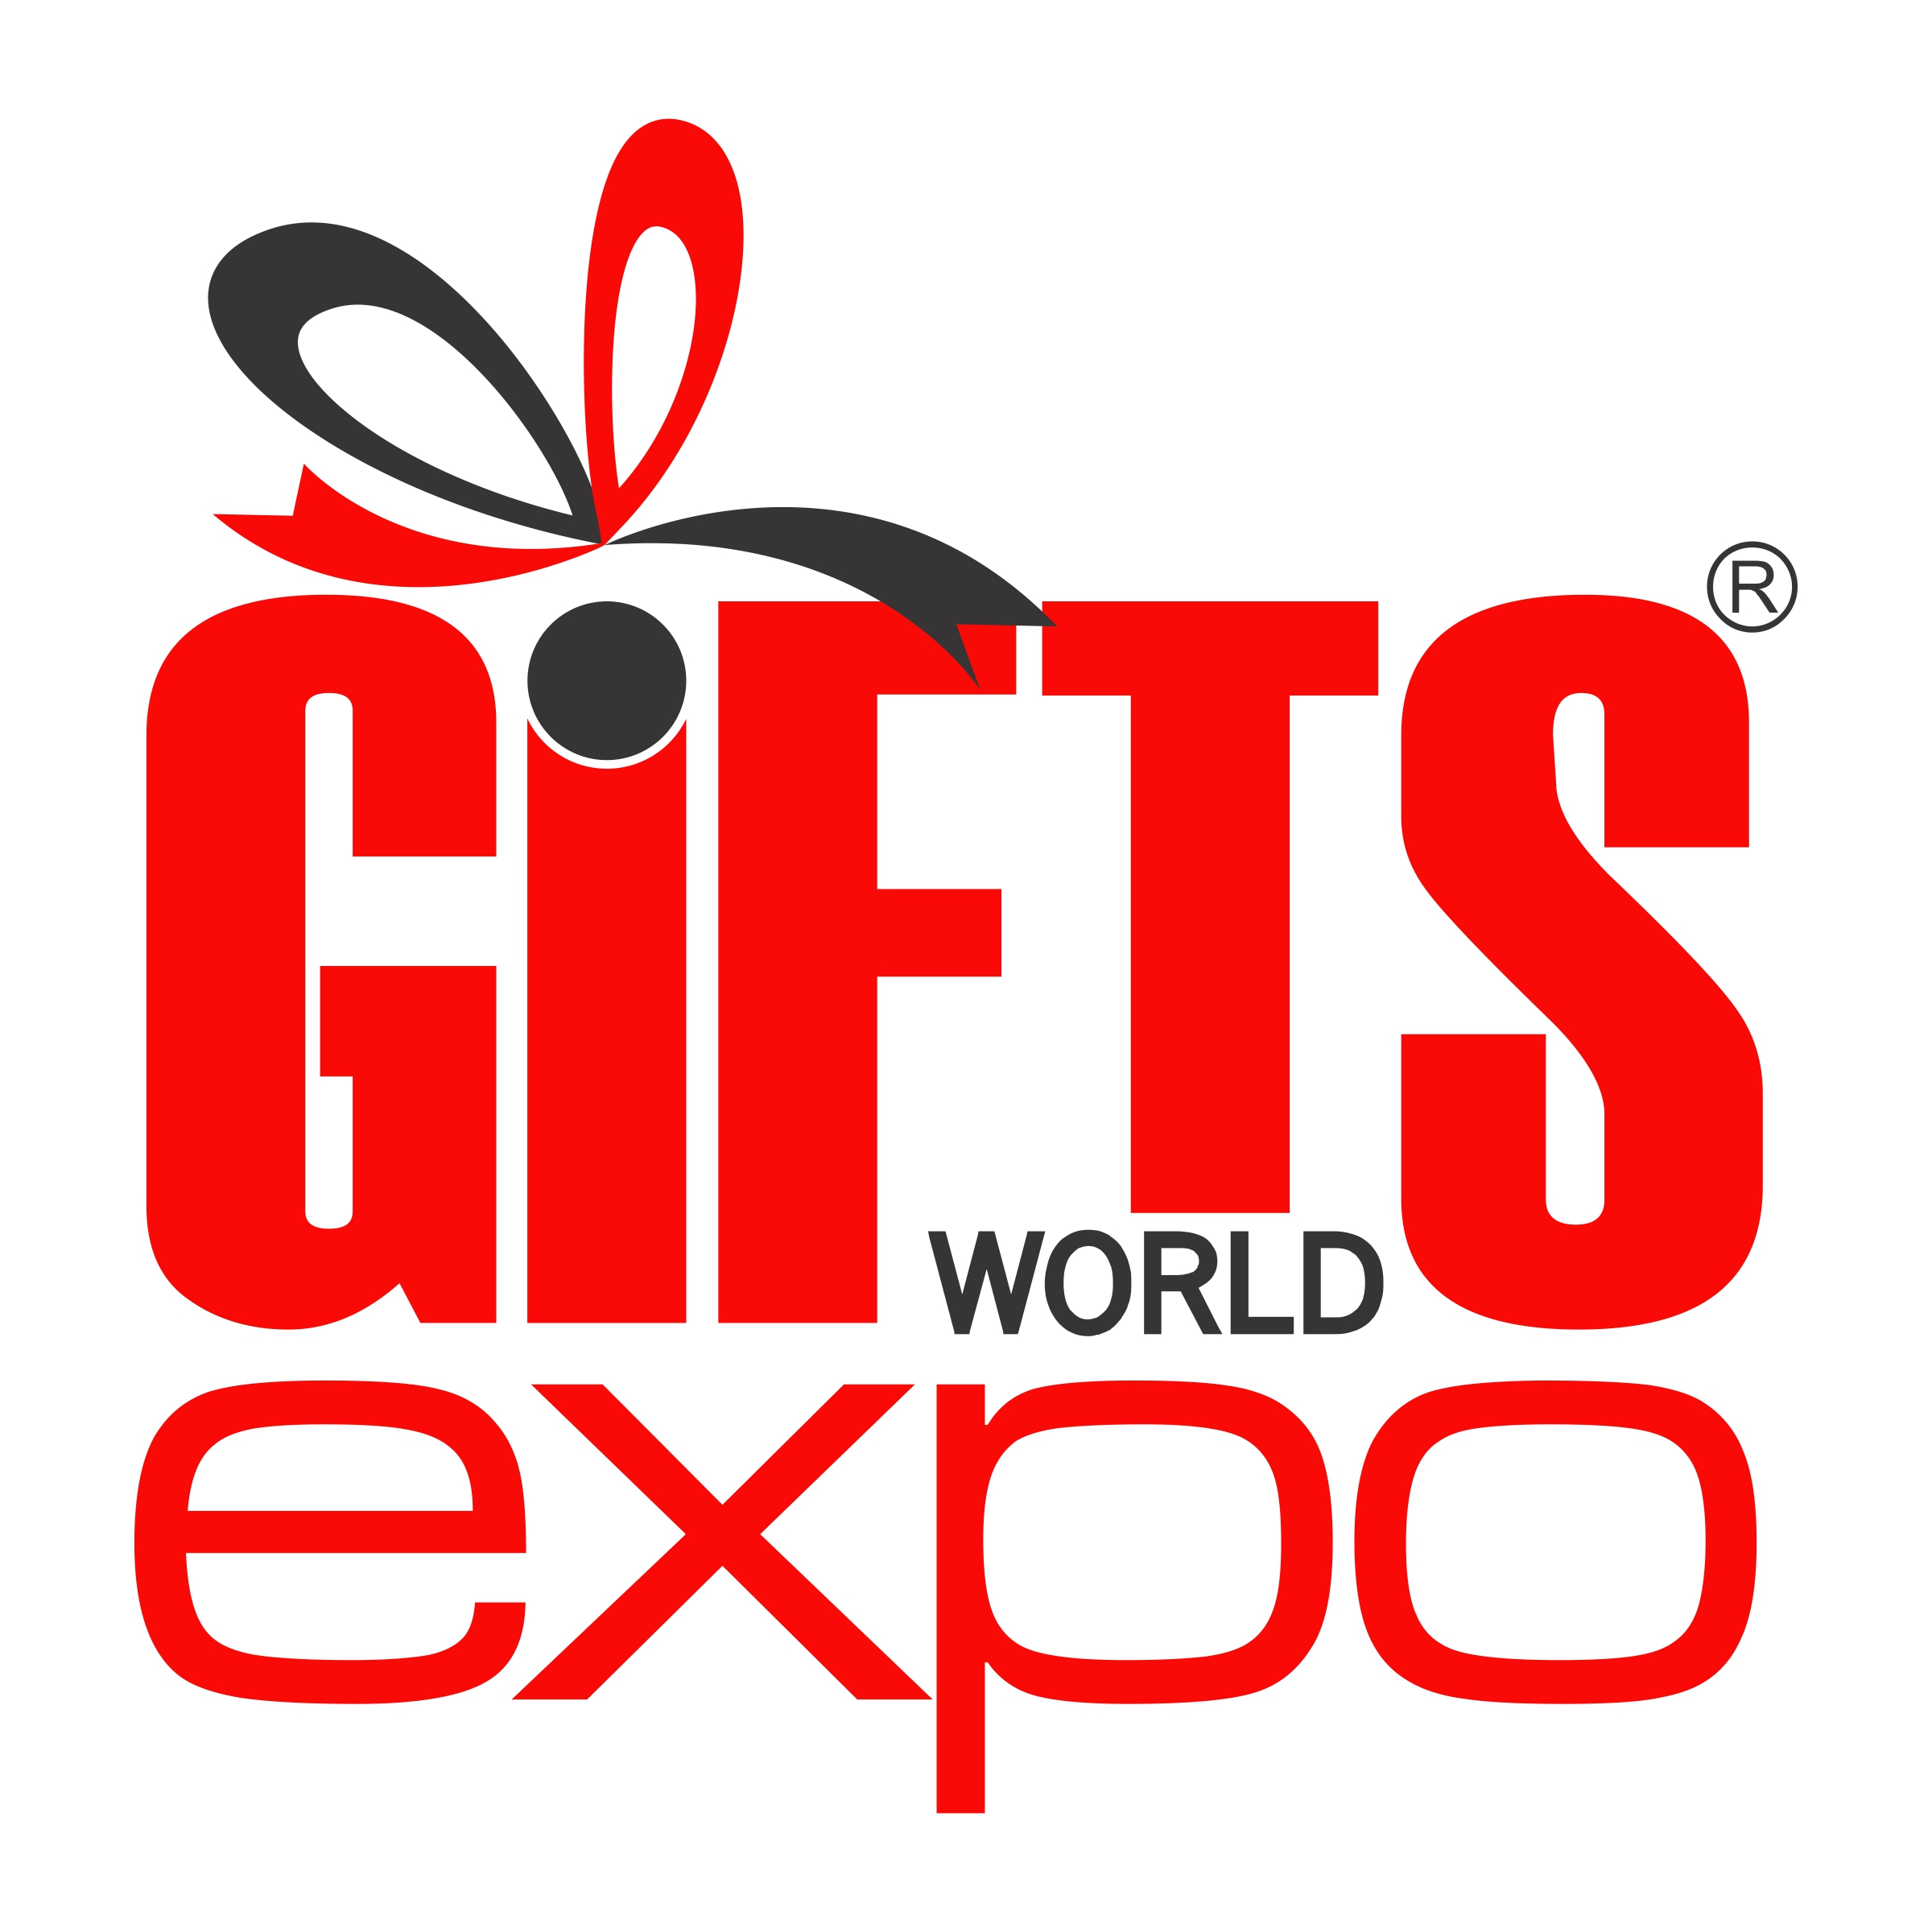 Biggies Confirm Participation at Gifts World Expo’s New Delhi Edition, More Enquiries Flowing In